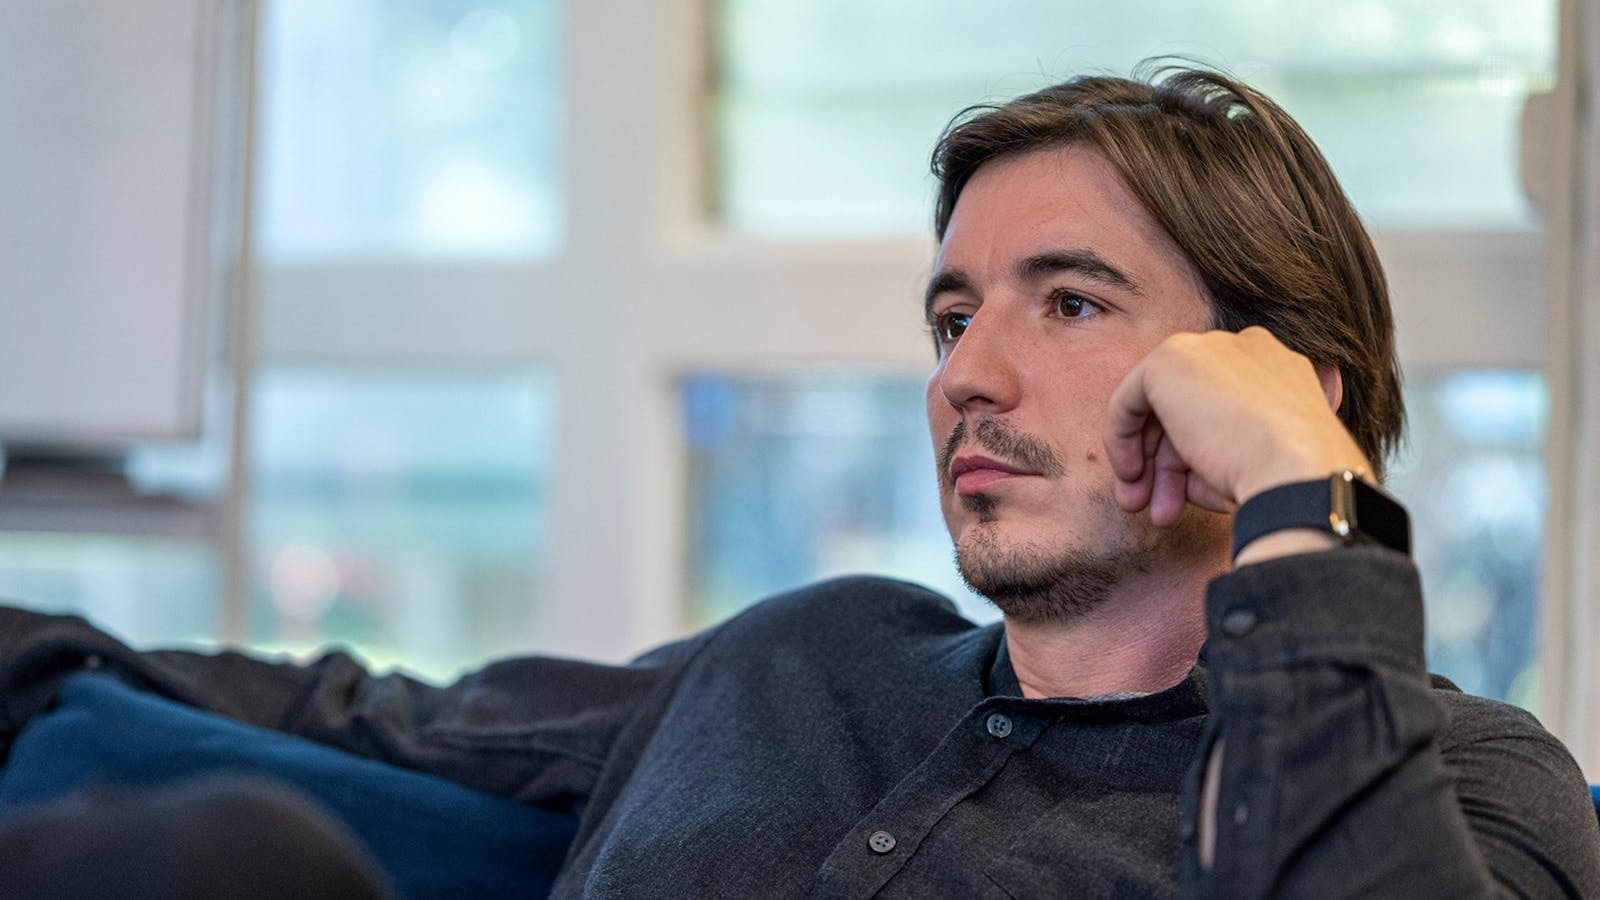 Robinhood Co-Founder and CEO Vlad Tenev. Photo by Bloomberg.